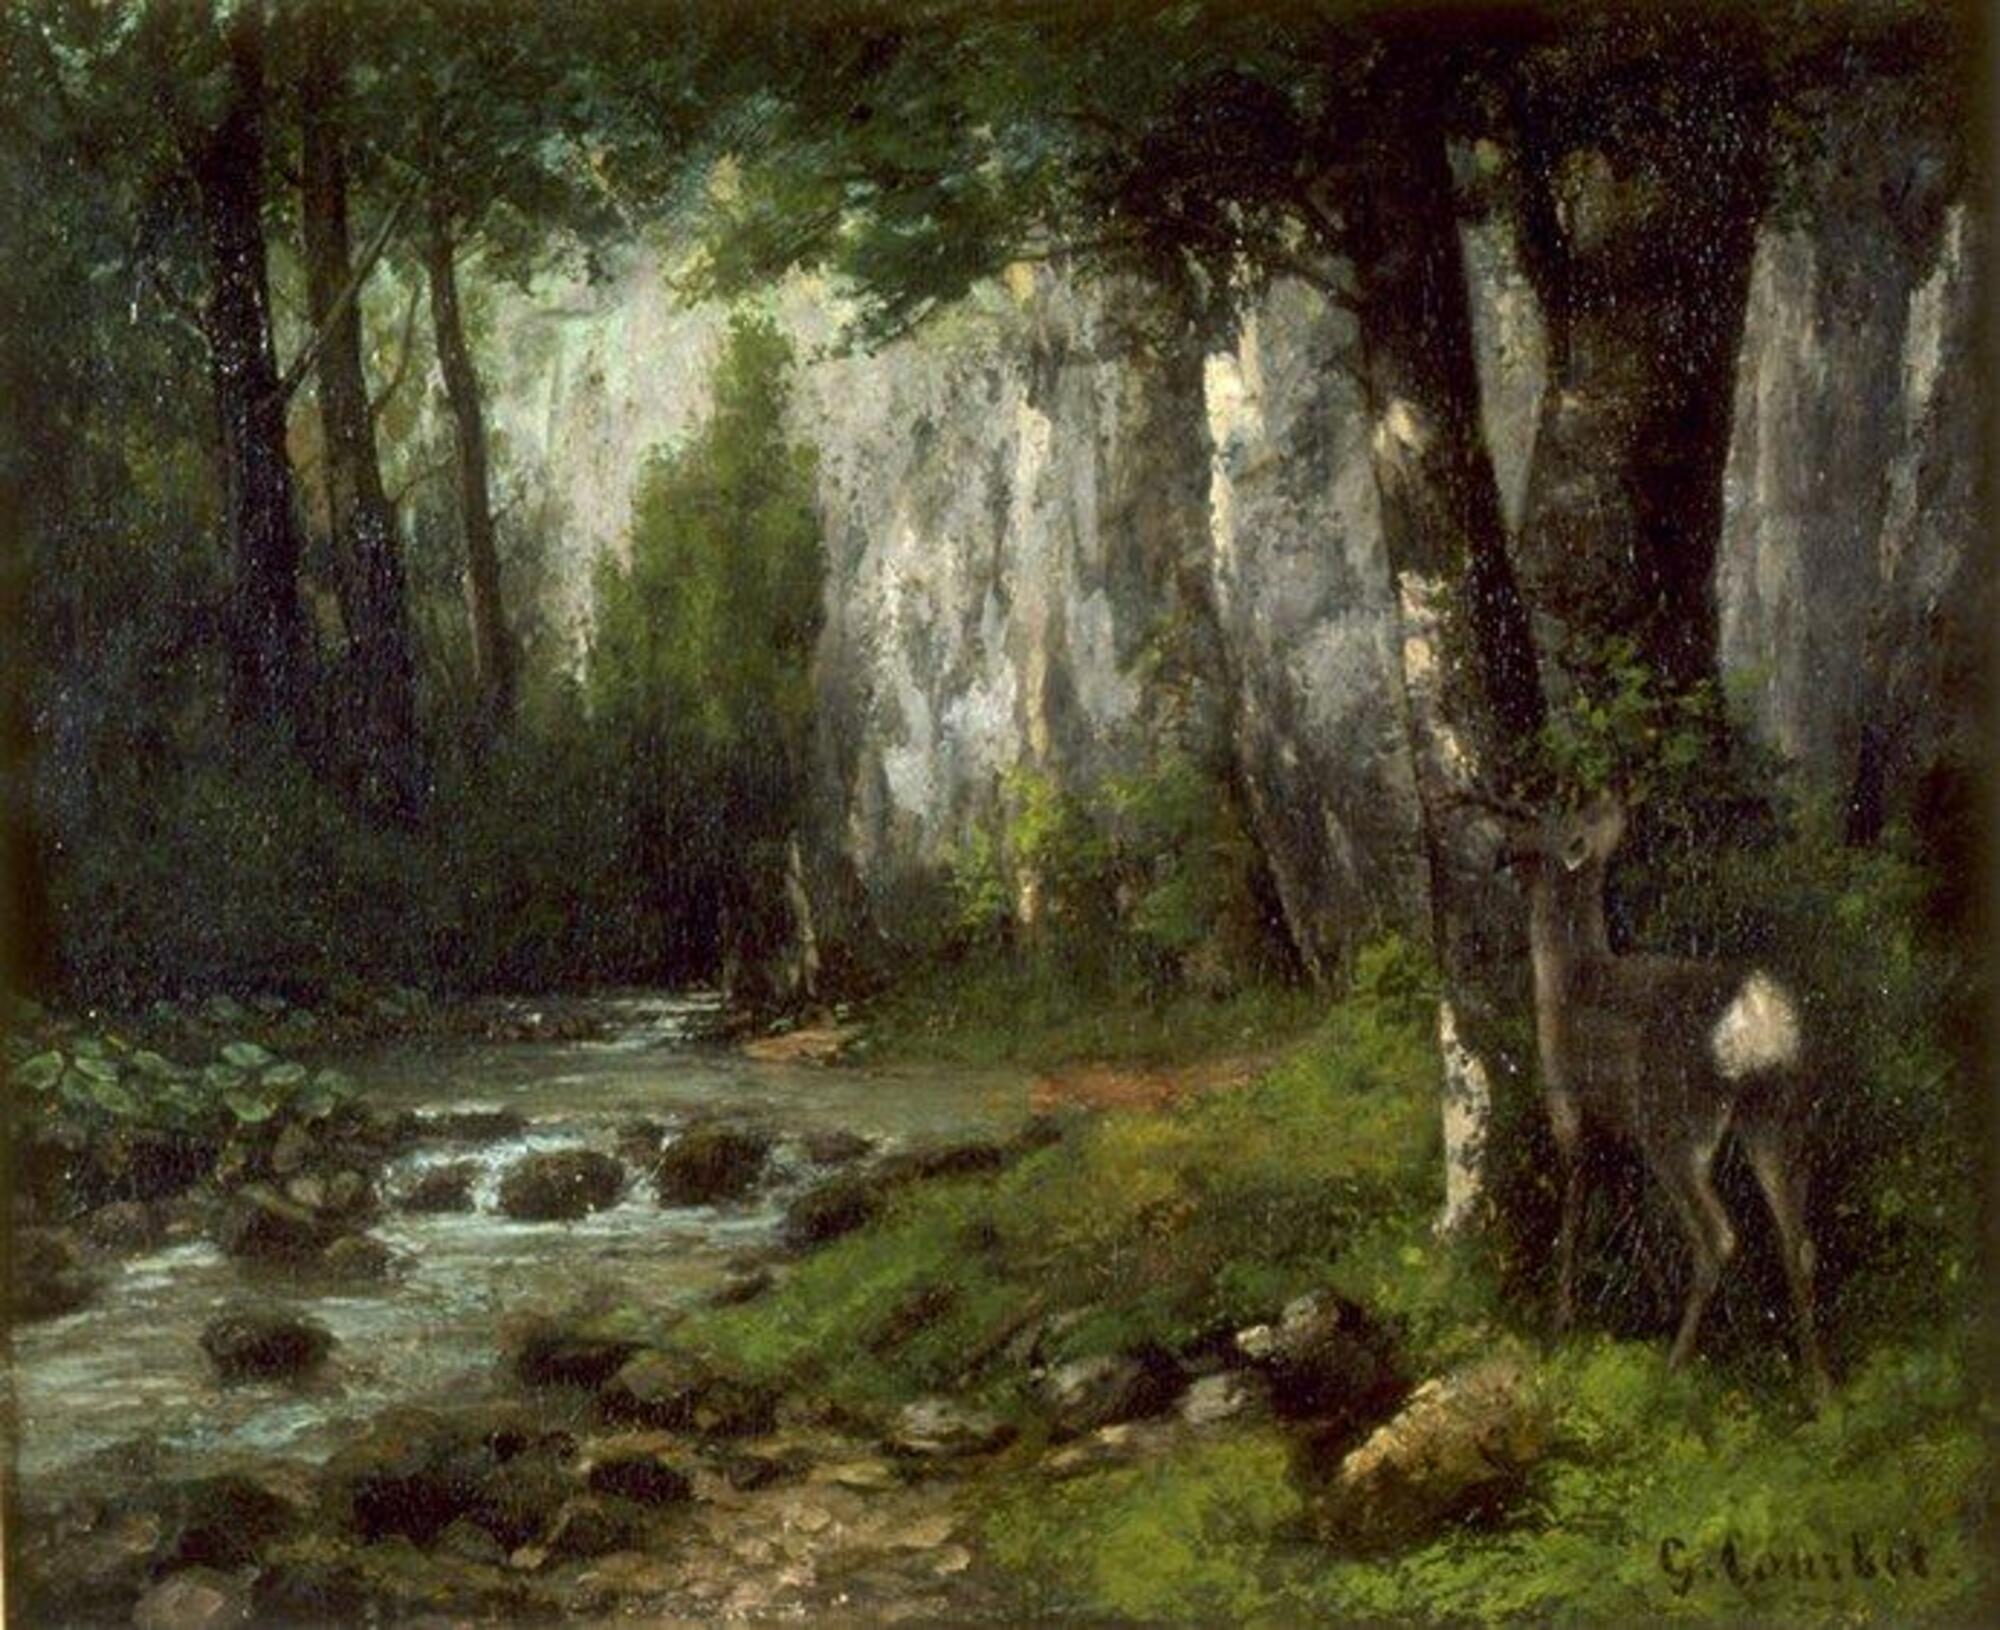 A deer stands in front of a tree, with tail towards the viewer.  There is a creek that runs along the left side of the image.  It is a heavily wooded area with stones in the creek and brighter green grass on the right side.